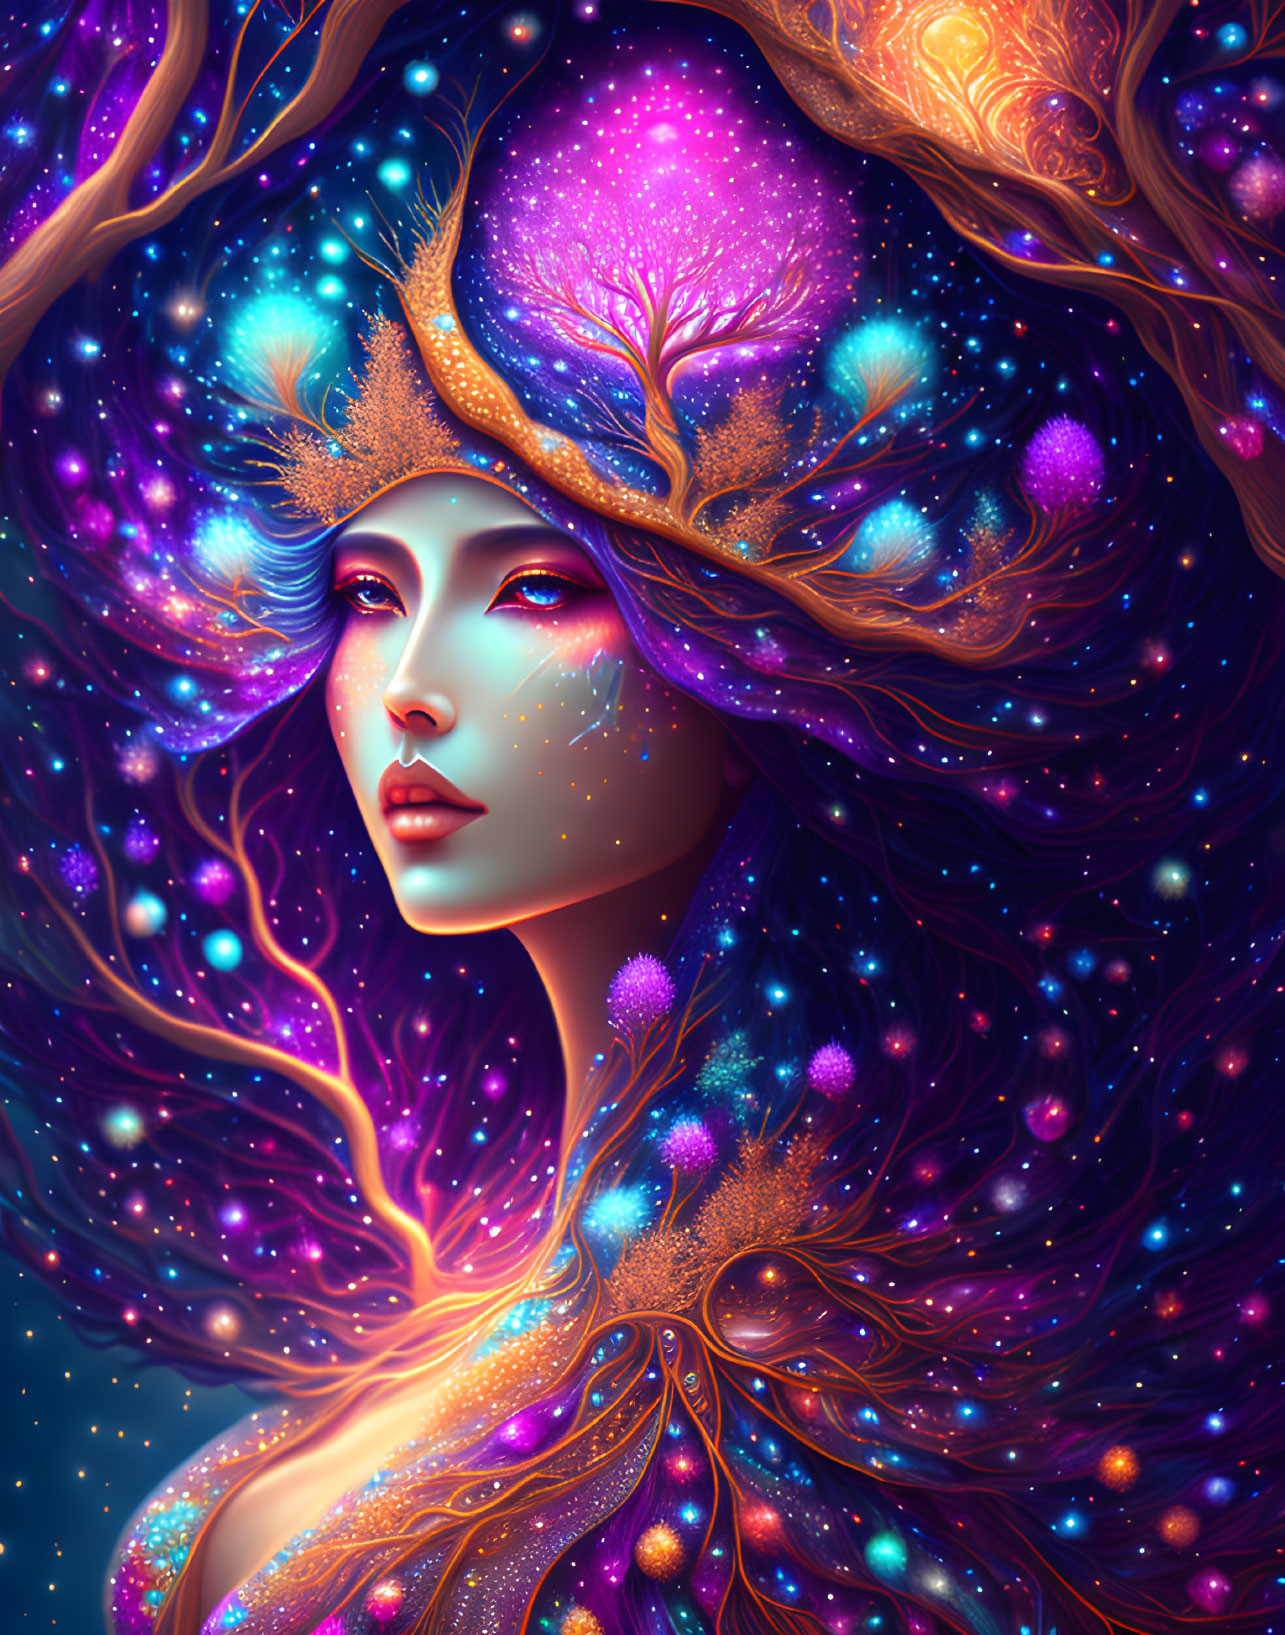 Illustration of woman with cosmic floral elements symbolizing magical interconnectedness.